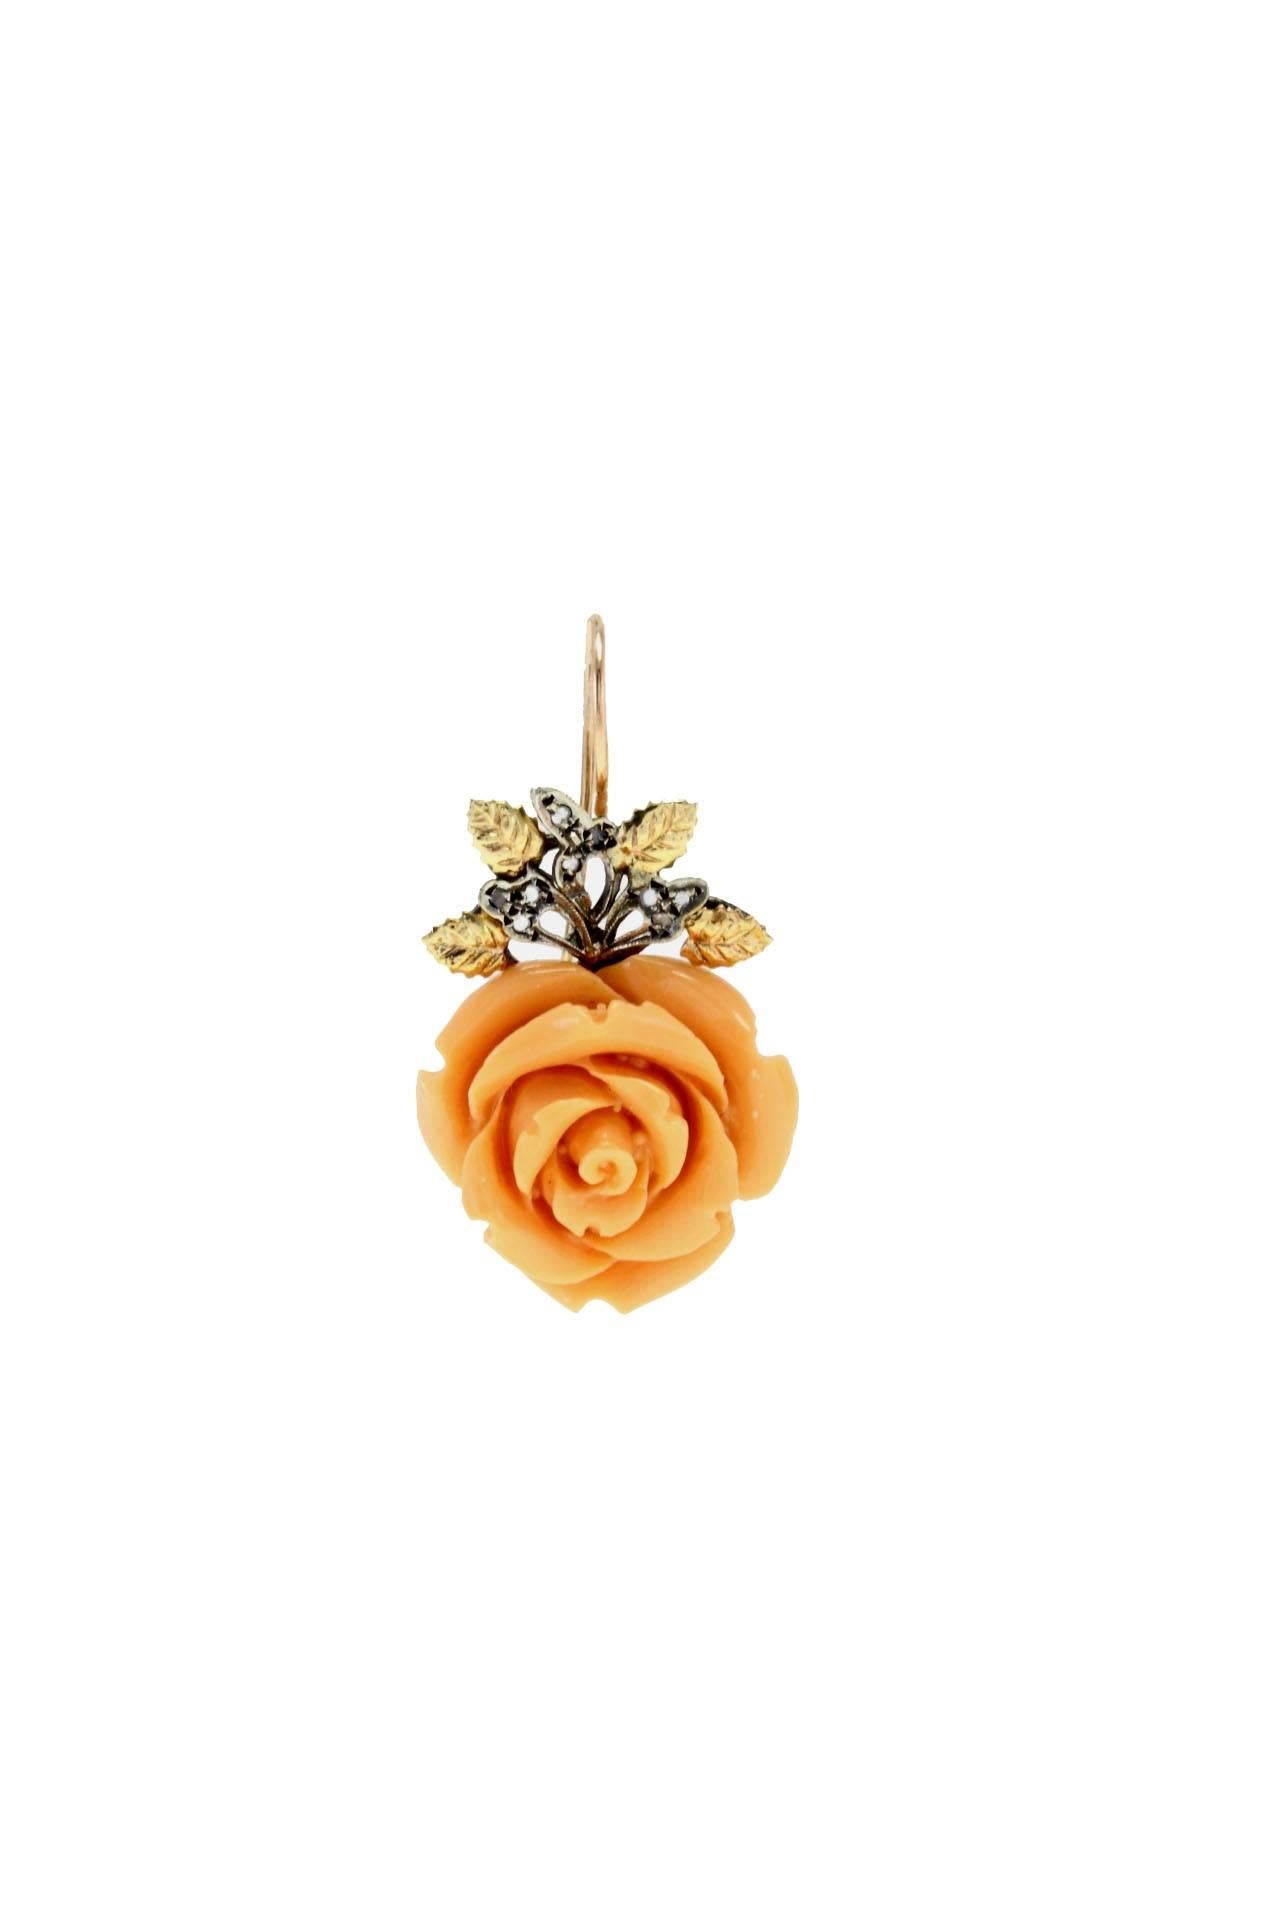 Rose shaped coral with pasta dangle earrings embellished with 9kt yellow gold and silver leaves covered in diamonds.

diamonds 0.14kt
tot weight 12.4gr
r.f.  iga